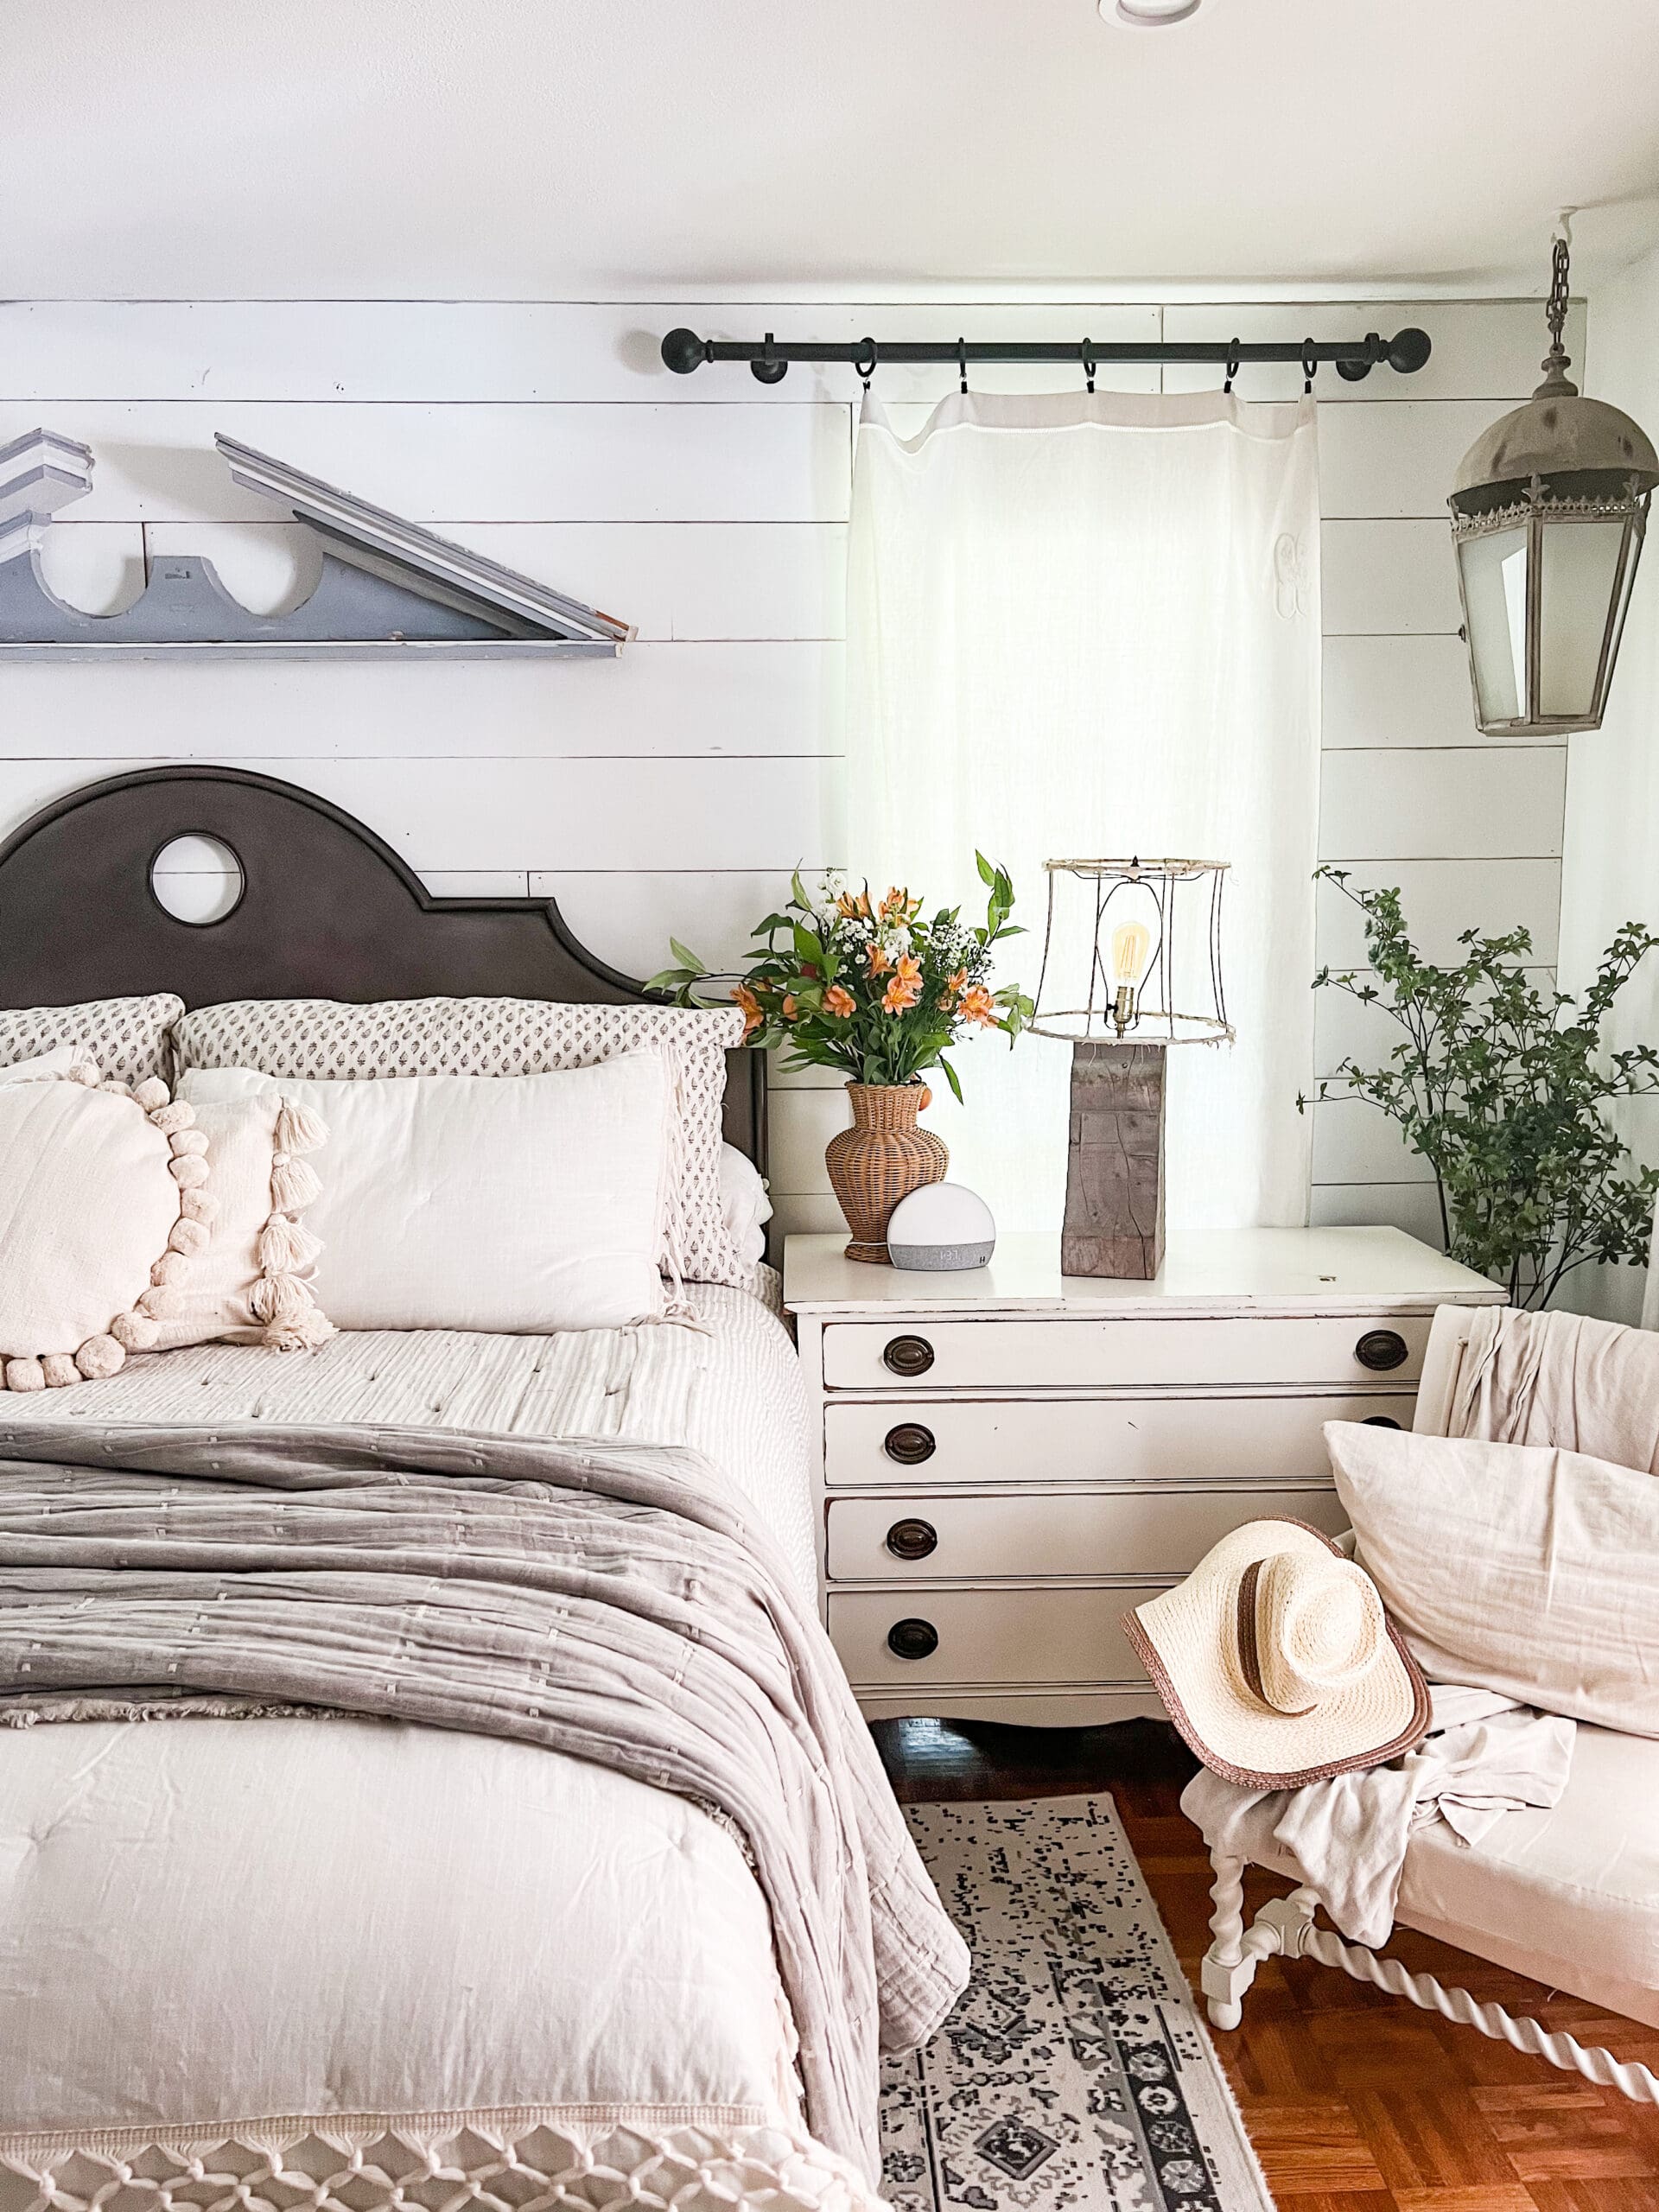 cute white dresser styled with fresh flowers in woven vase and a lamp made out of salvaged wood, next to a side chair with cute throw blanket and pillow